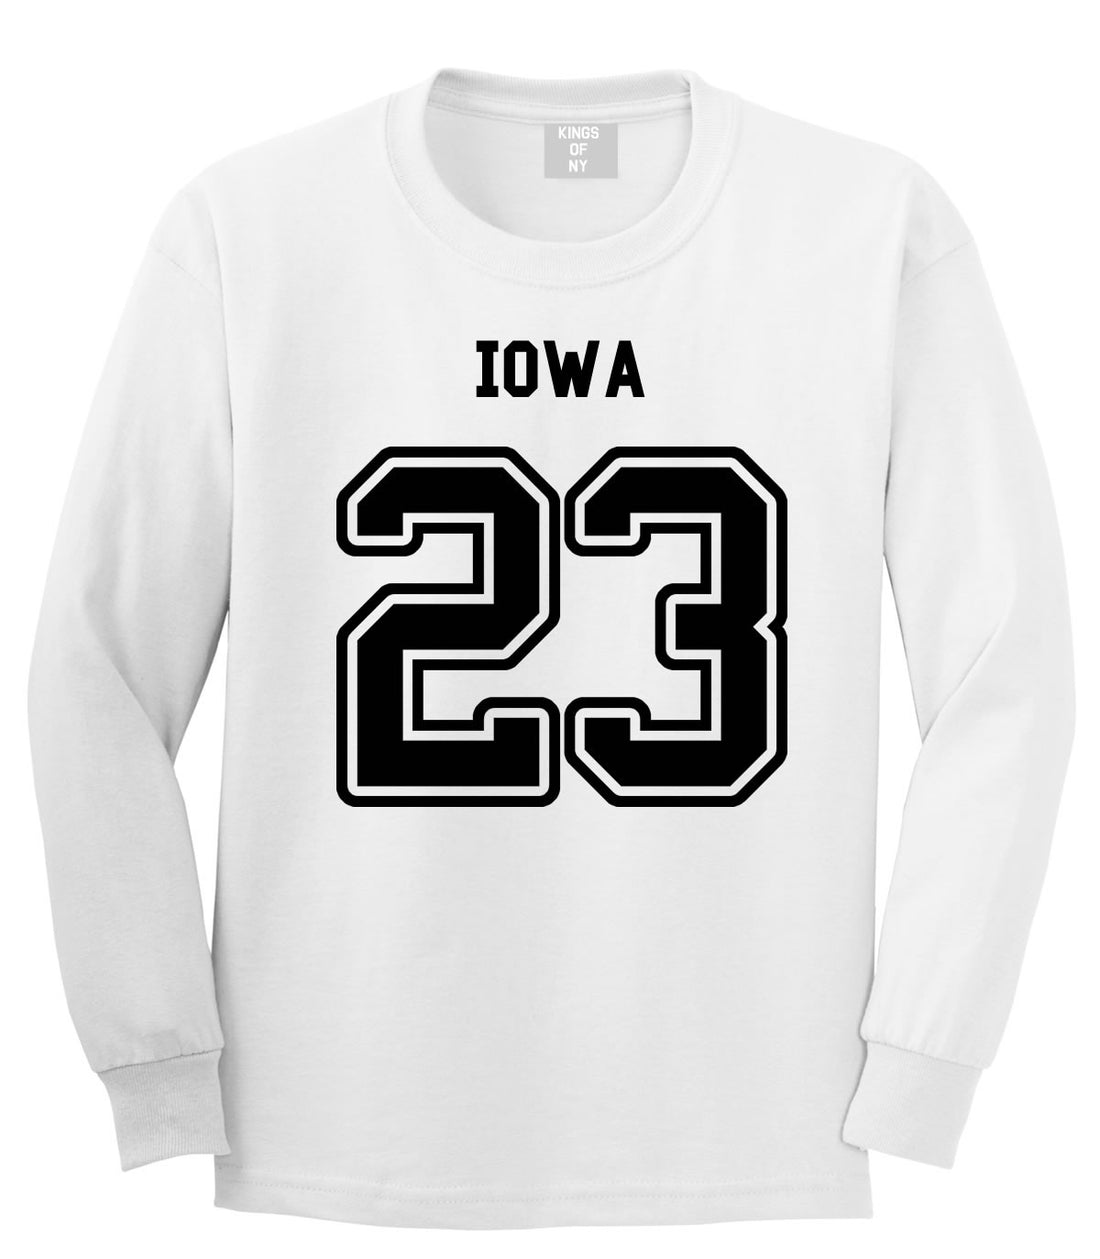 Sport Style Iowa 23 Team State Jersey Long Sleeve T-Shirt By Kings Of NY